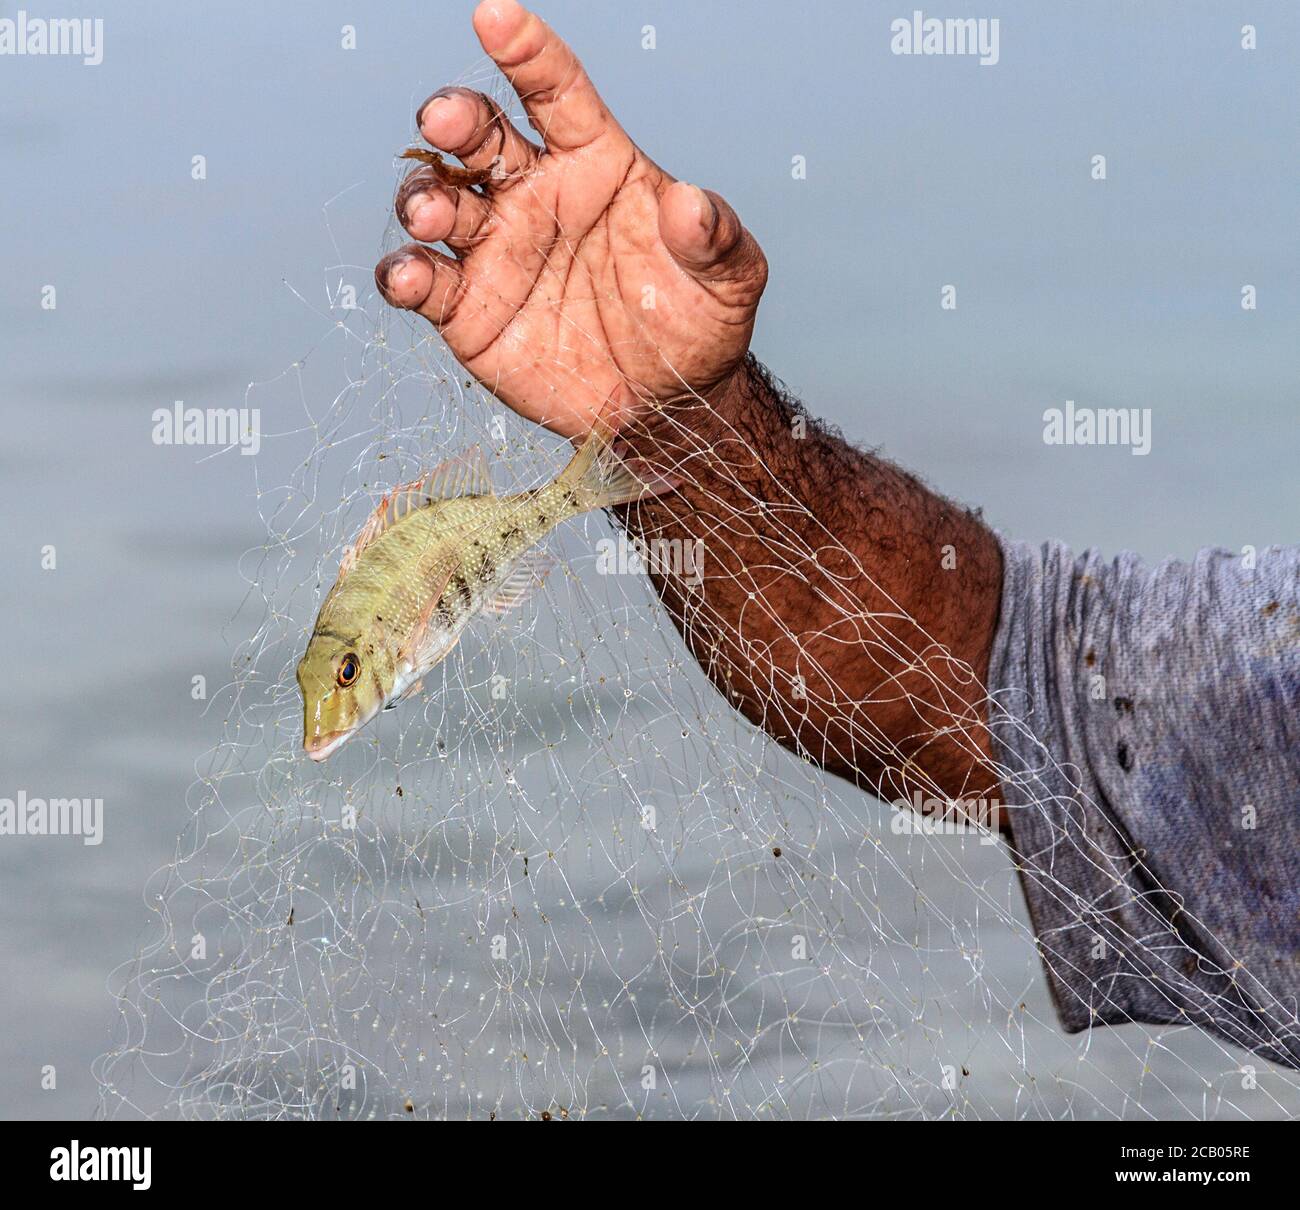 Juvenile orange striped emperor fish (Lethrinus obsoletus) caught with a net in shallow waters off the beach in Kosrae, Micronesia. A long net made of filament threads is is spread by two people. A third person smacks the water to drive fish into the net. Stock Photo